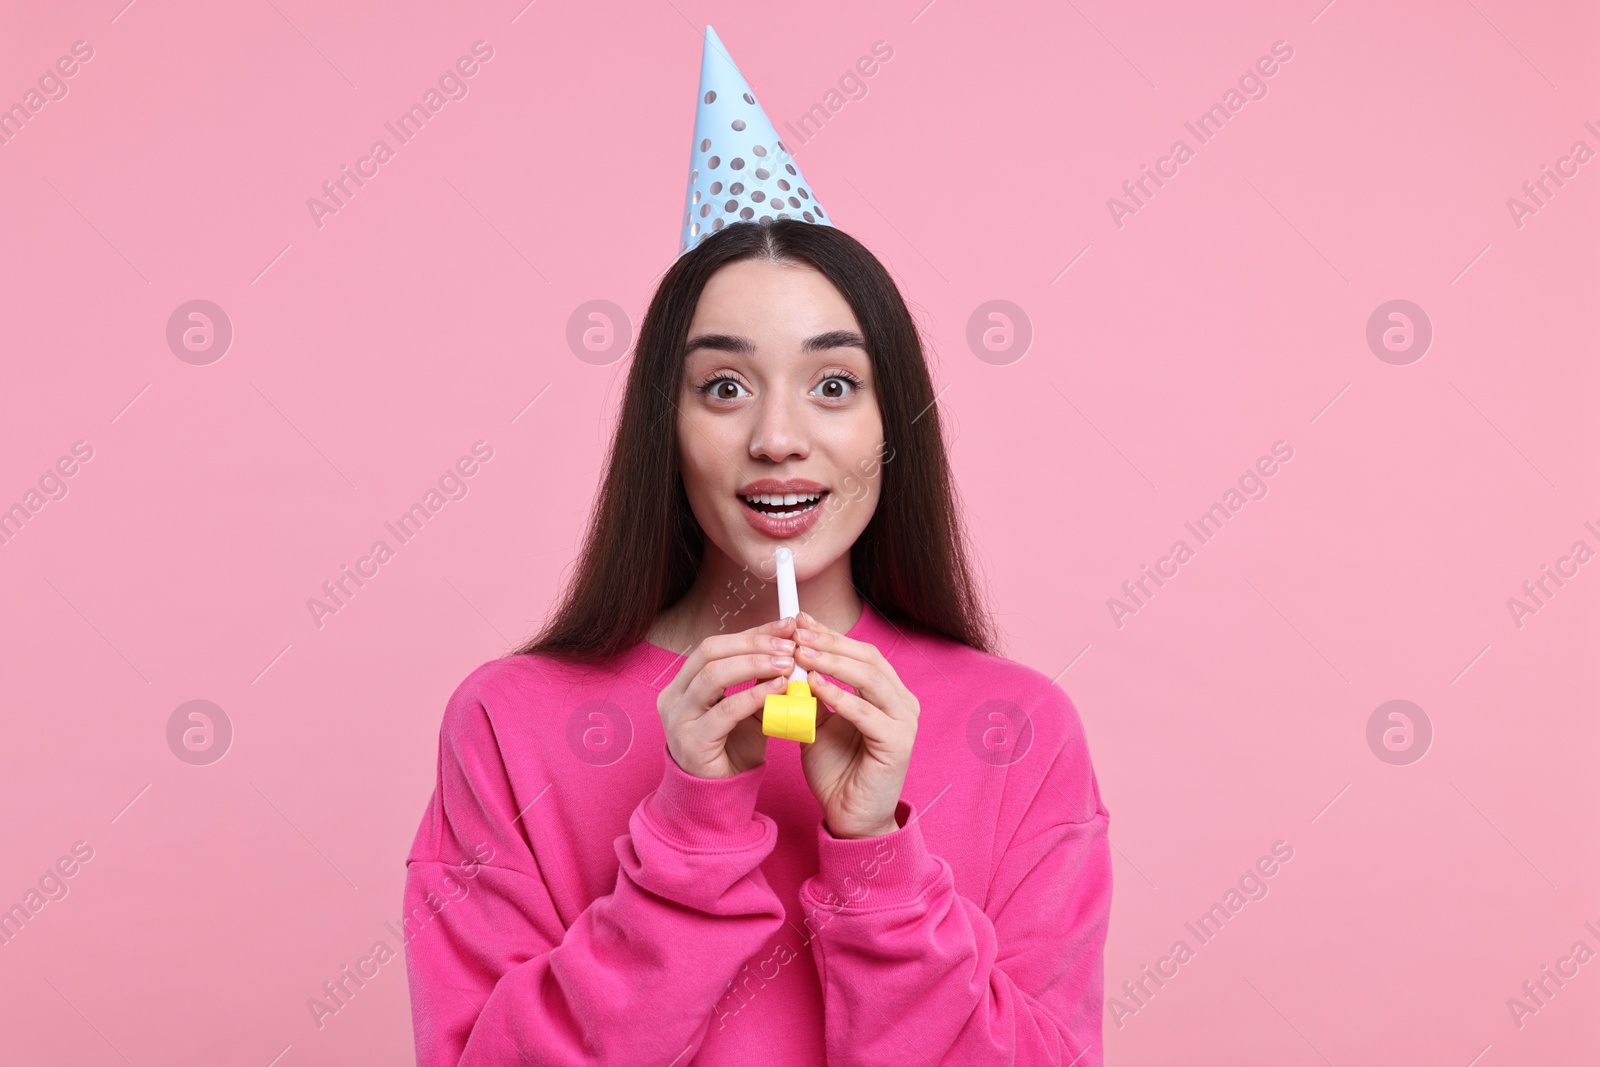 Photo of Woman in party hat with blower on pink background